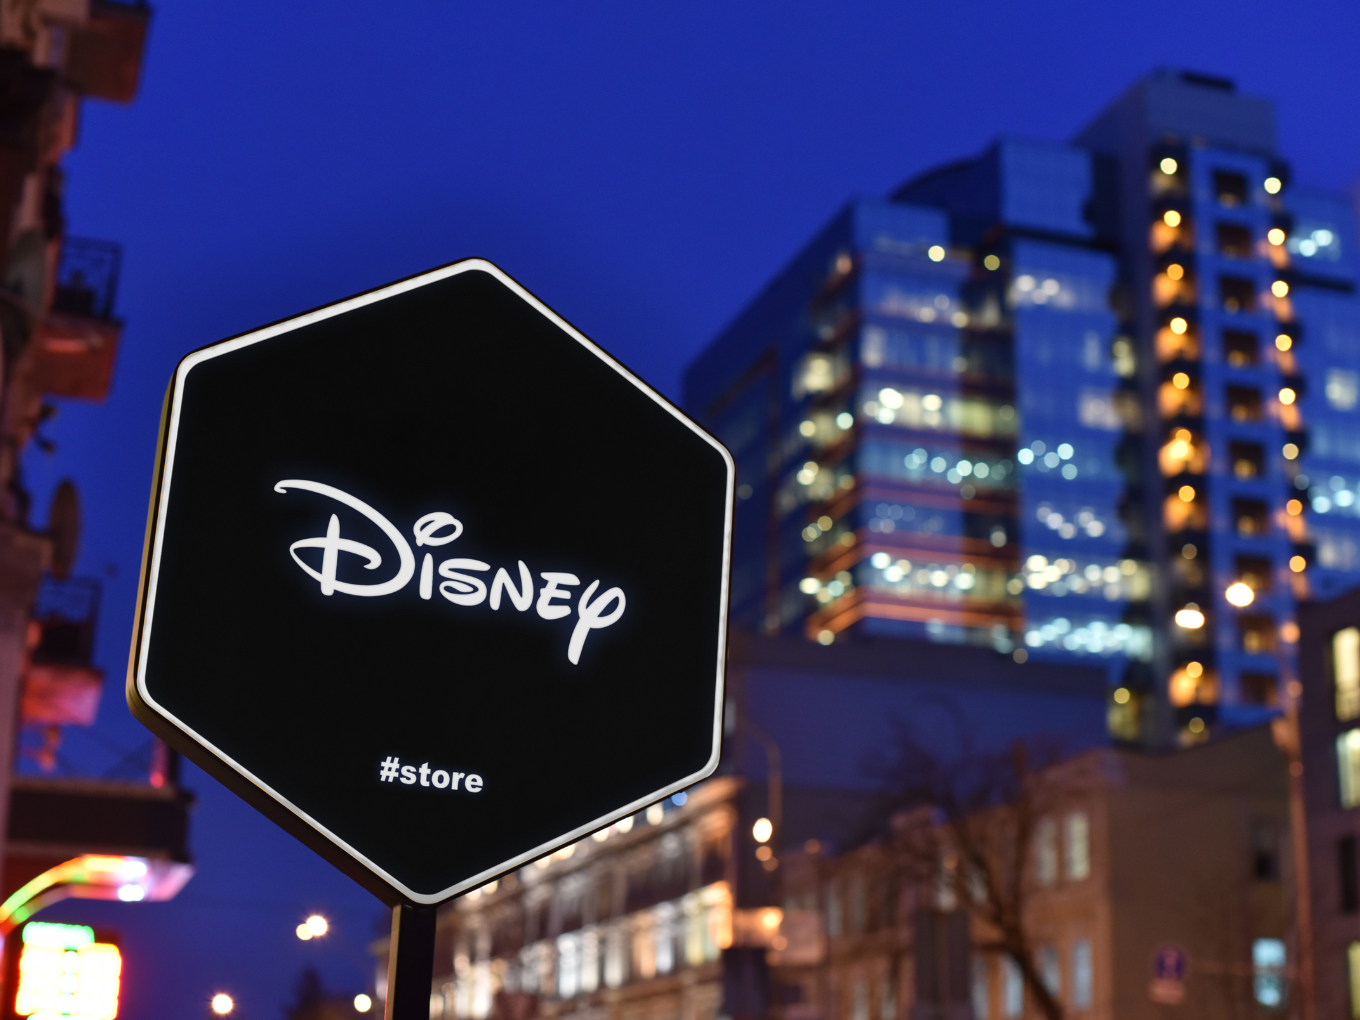 Its Finally Official! Reliance & Disney Seal The Merger Deal Of India Media Ops